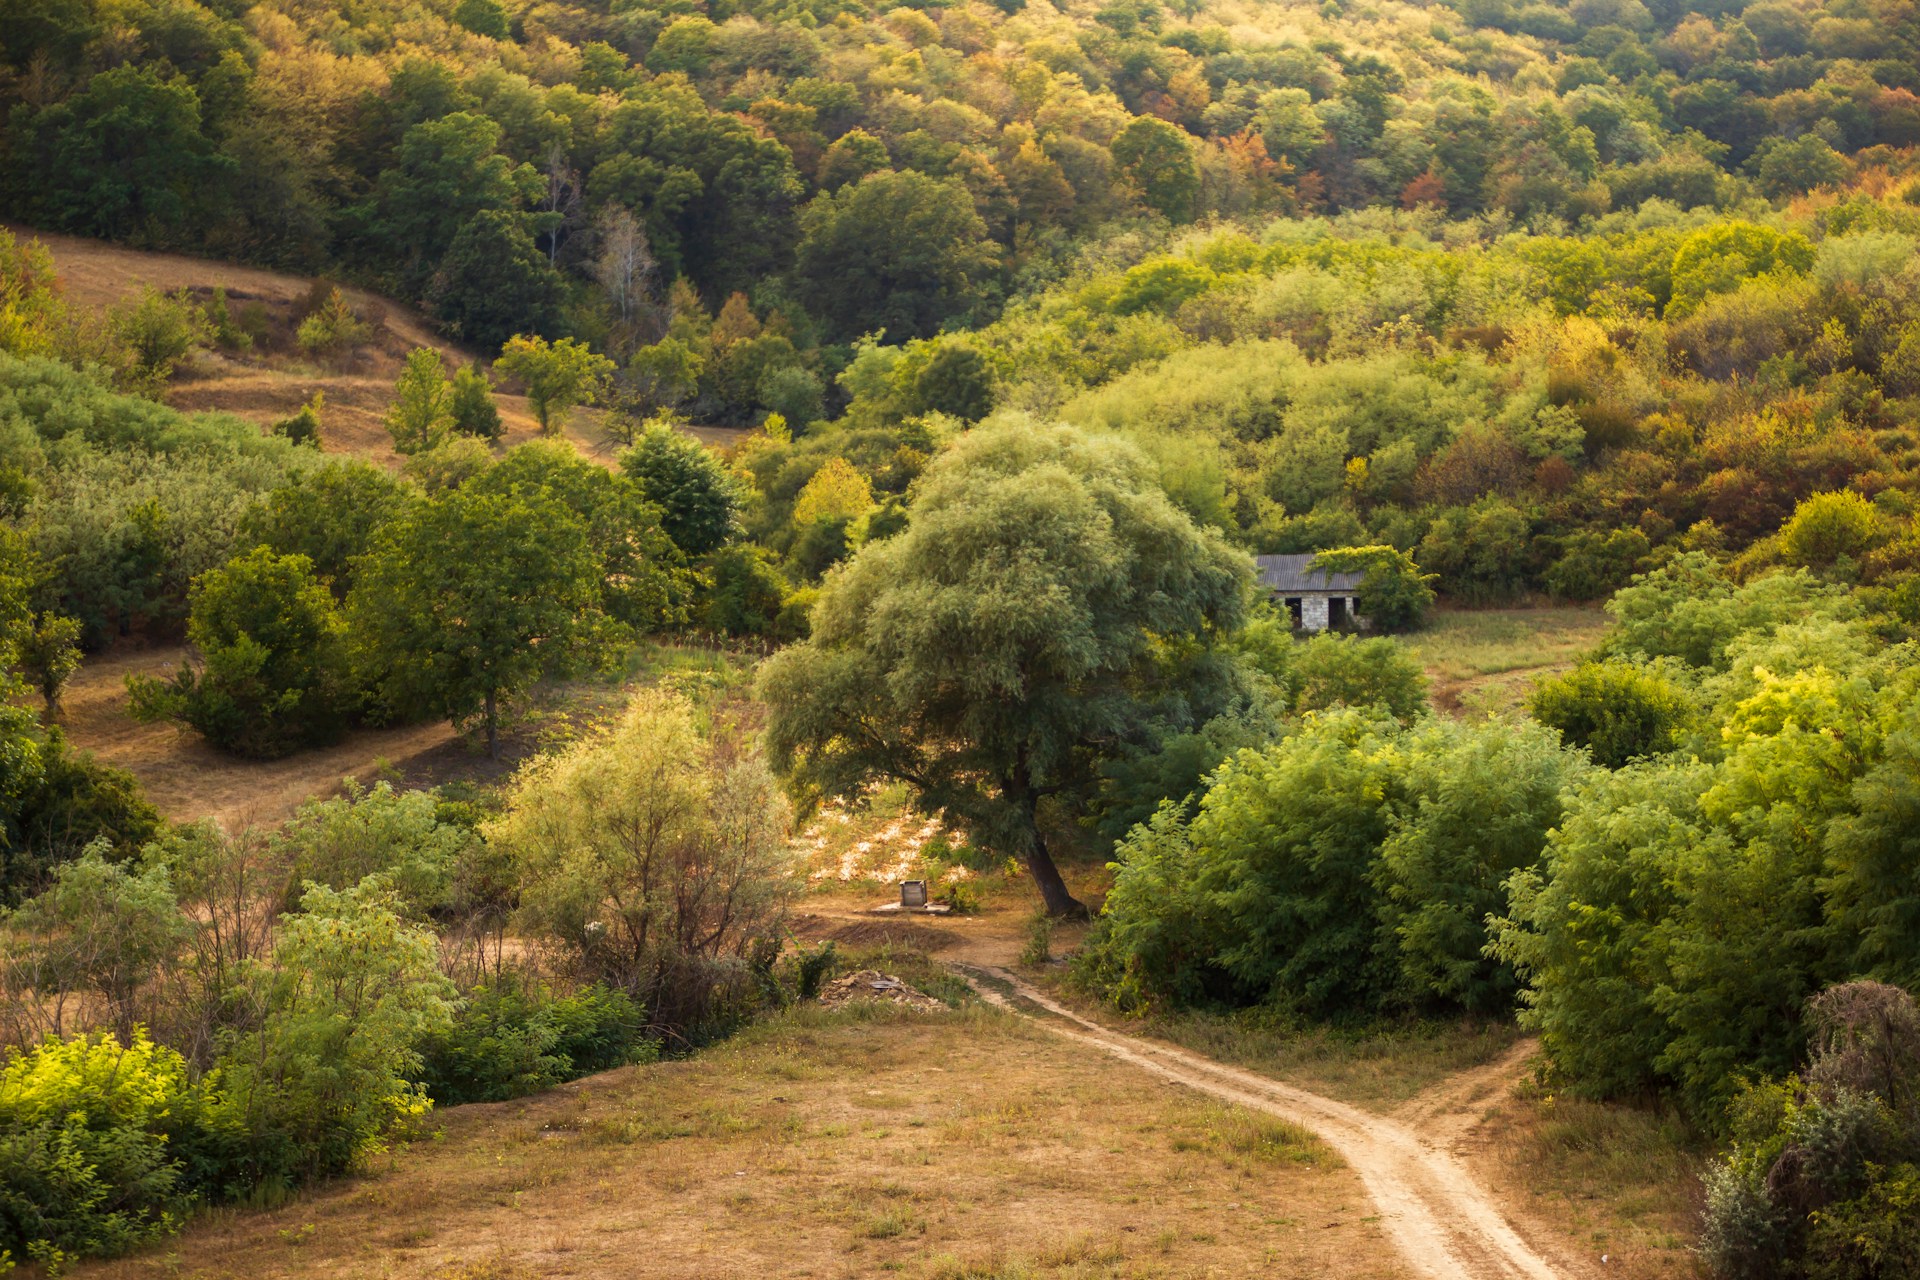 A forest in Moldova